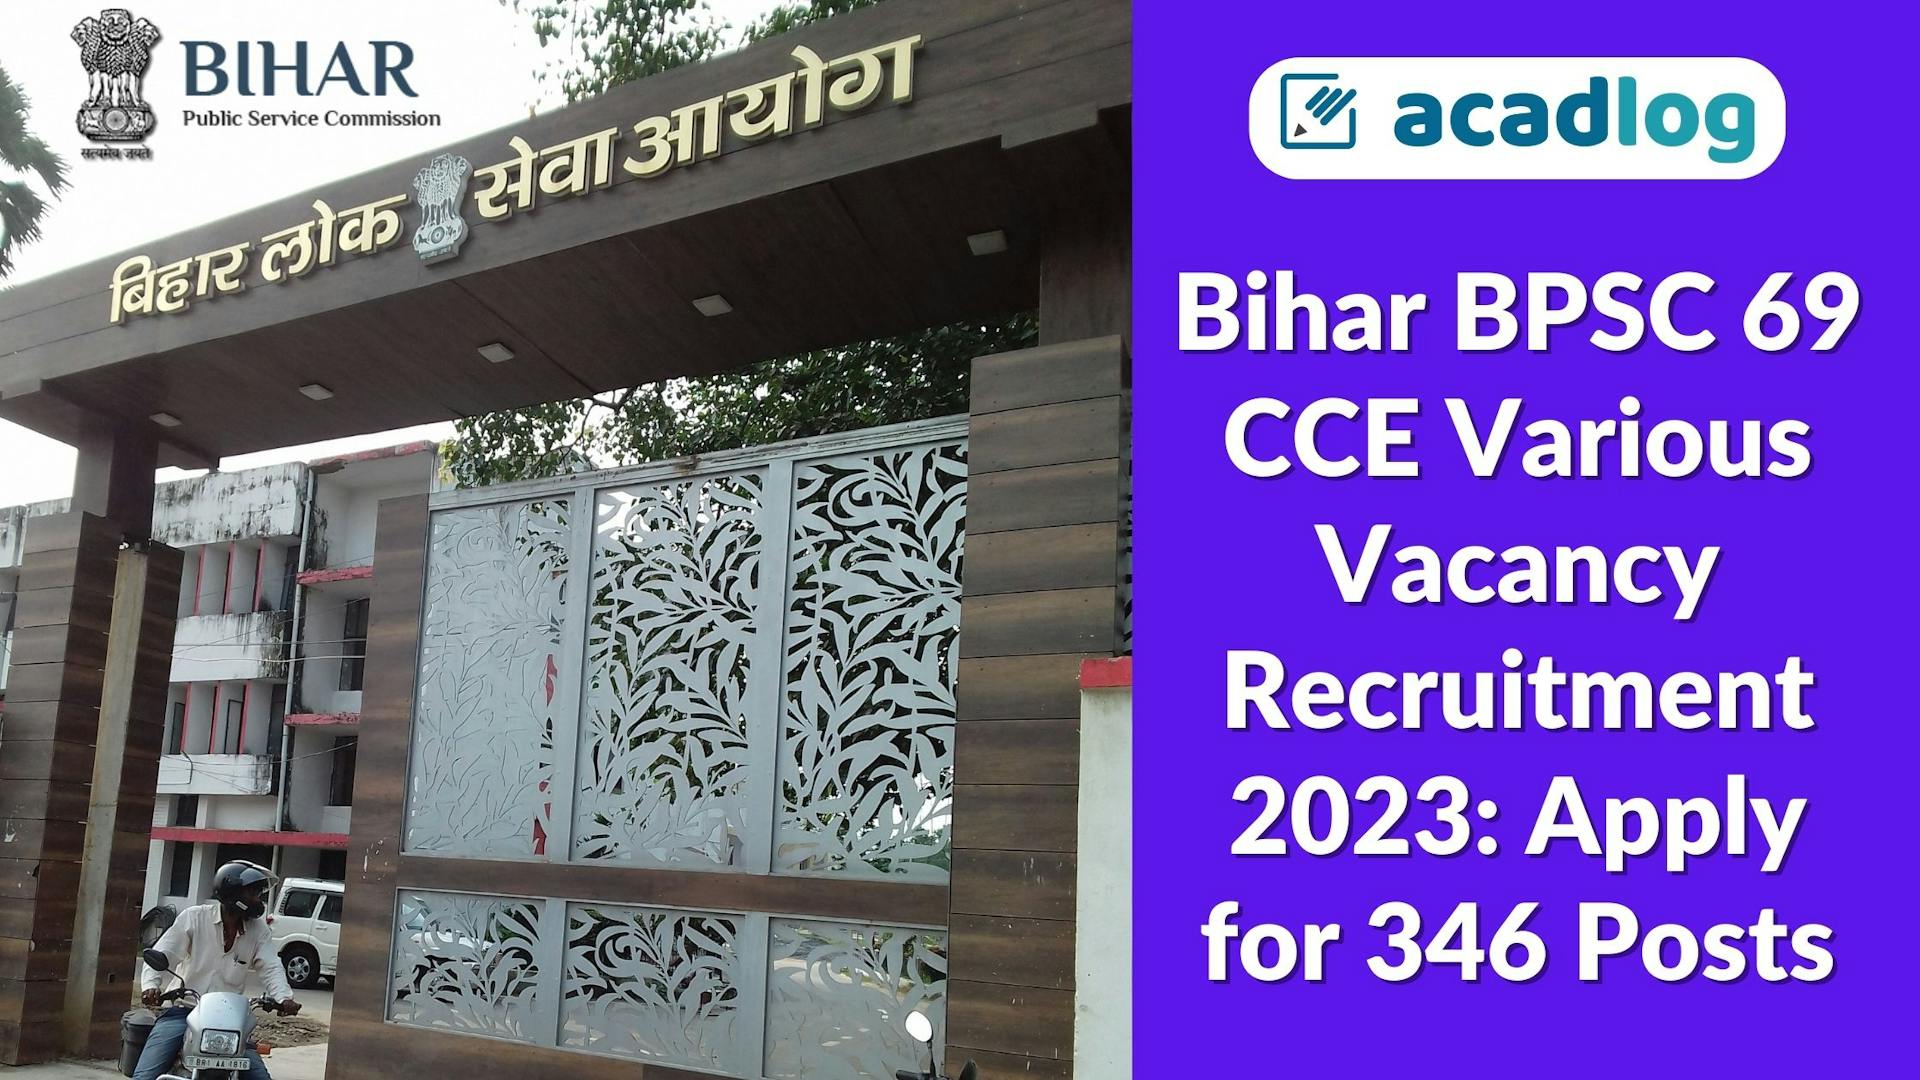 Bihar BPSC 69 CCE Various Vacancy Recruitment 2023: Apply for 346 Posts